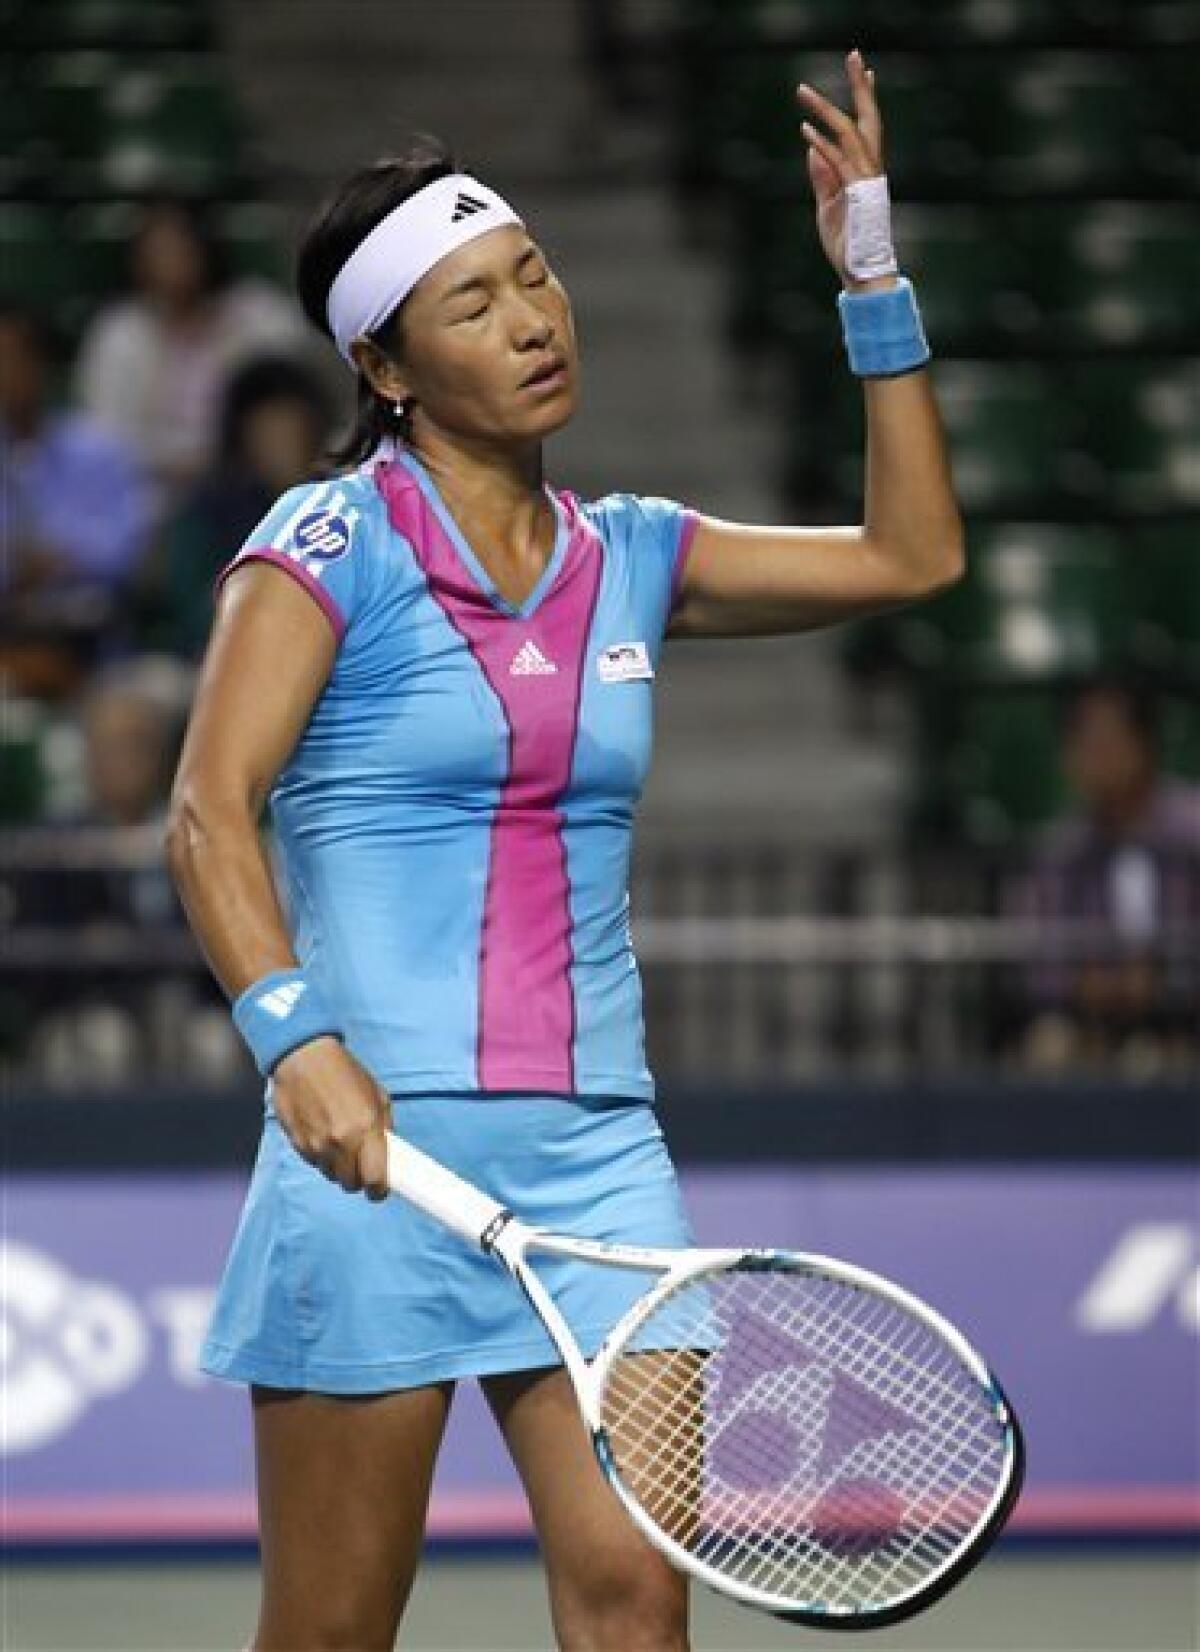 Kimiko Date-Krumm of Japan reacts to a lost point as she plays Mandy Minella of Luxembourg during the first round match of the Japan Pan Pacific Open tennis tournament in Tokyo, Monday, Sept. 26, 2011. Minella won 1-6, 6-3, 6-3. (AP Photo/Shizuo Kambayashi)